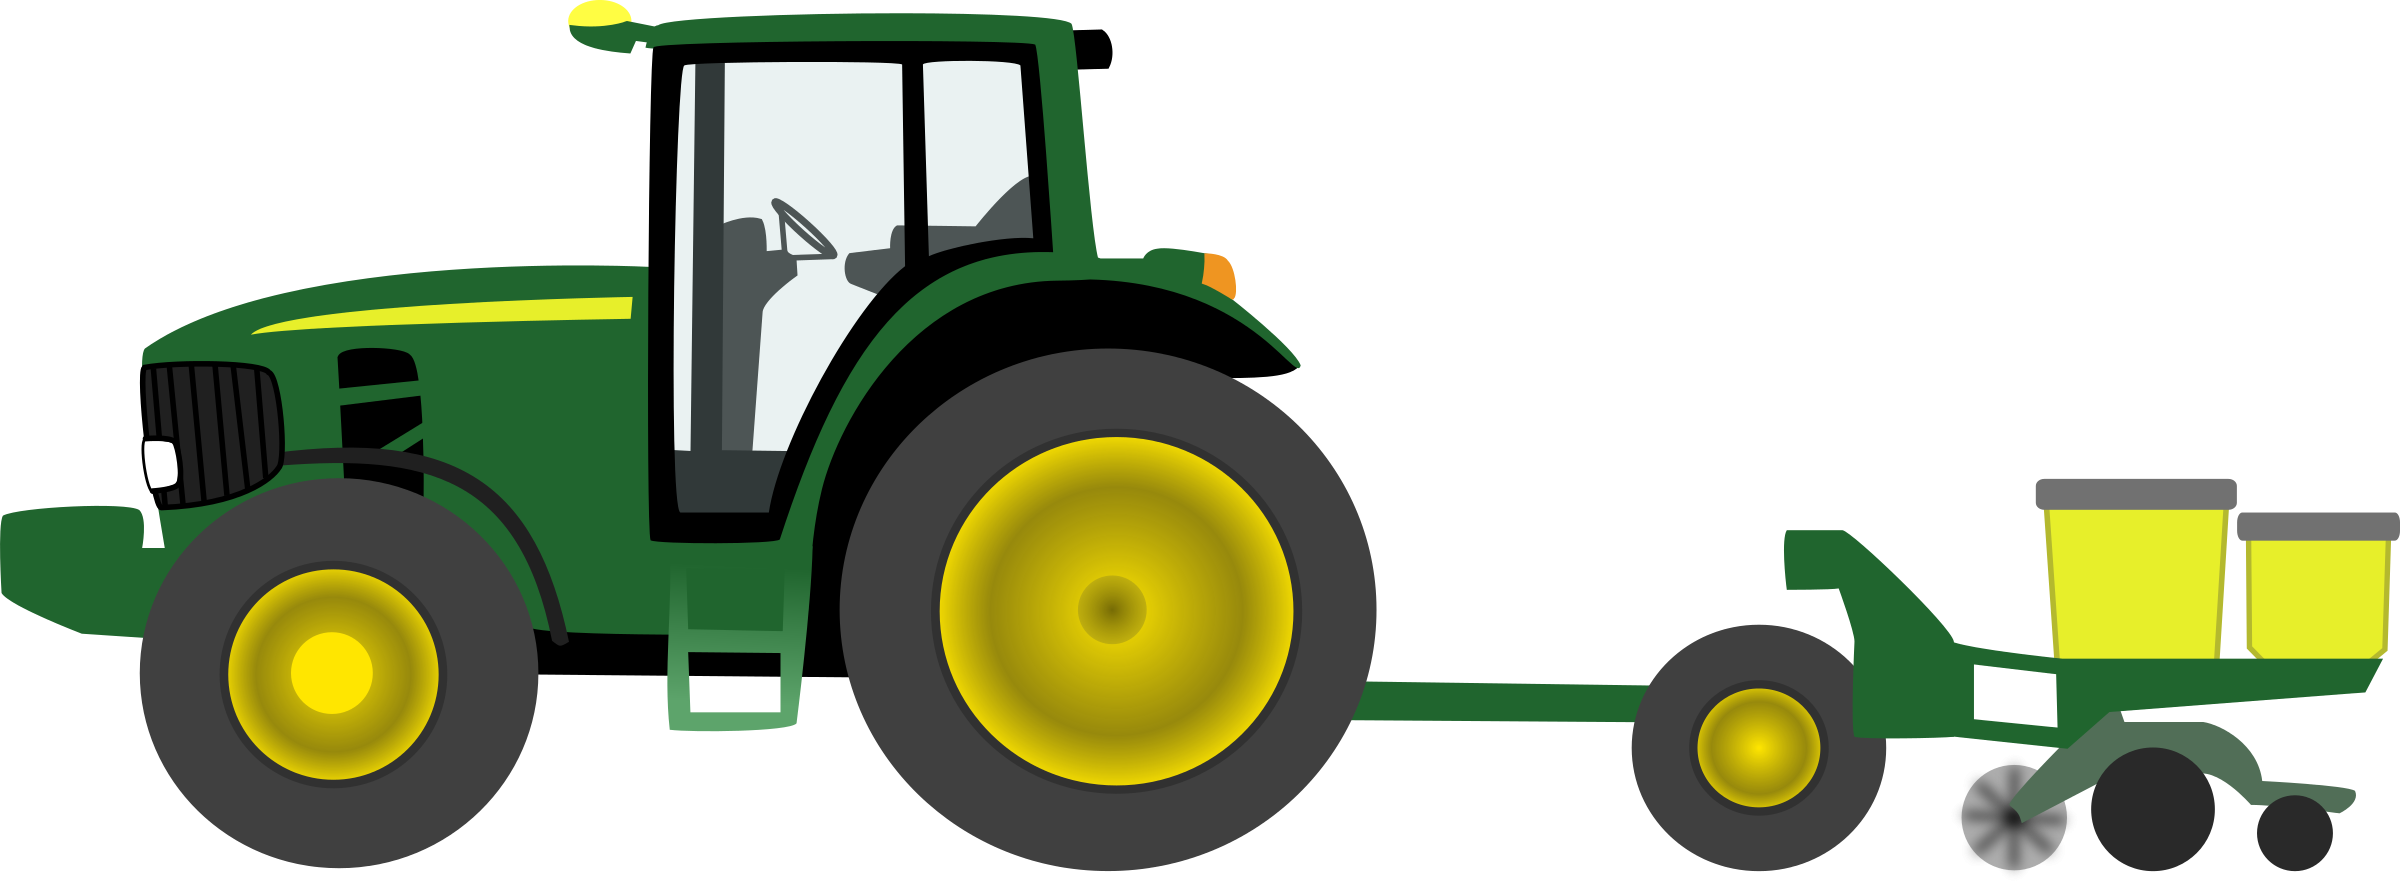 John Deere Tractor Clip Art - 2014 United Nations Climate Change Conference (2400x886)